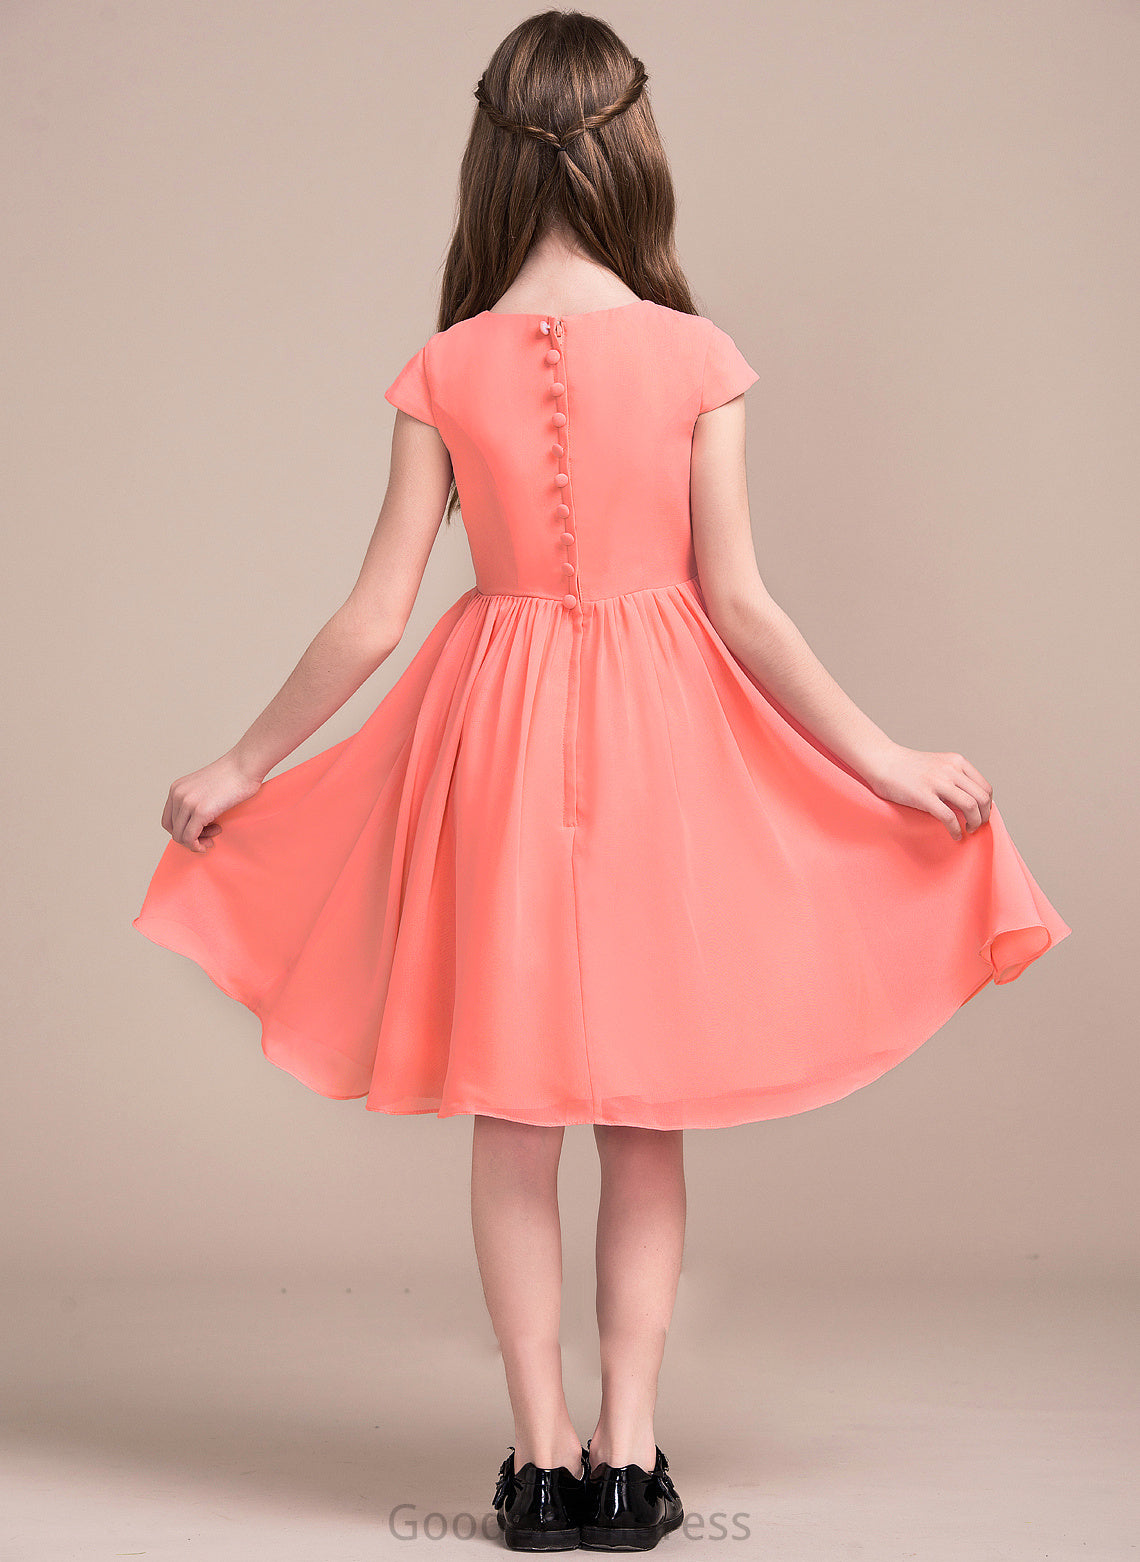 Neck Chiffon Scoop A-Line Junior Bridesmaid Dresses With Bow(s) Daisy Knee-Length